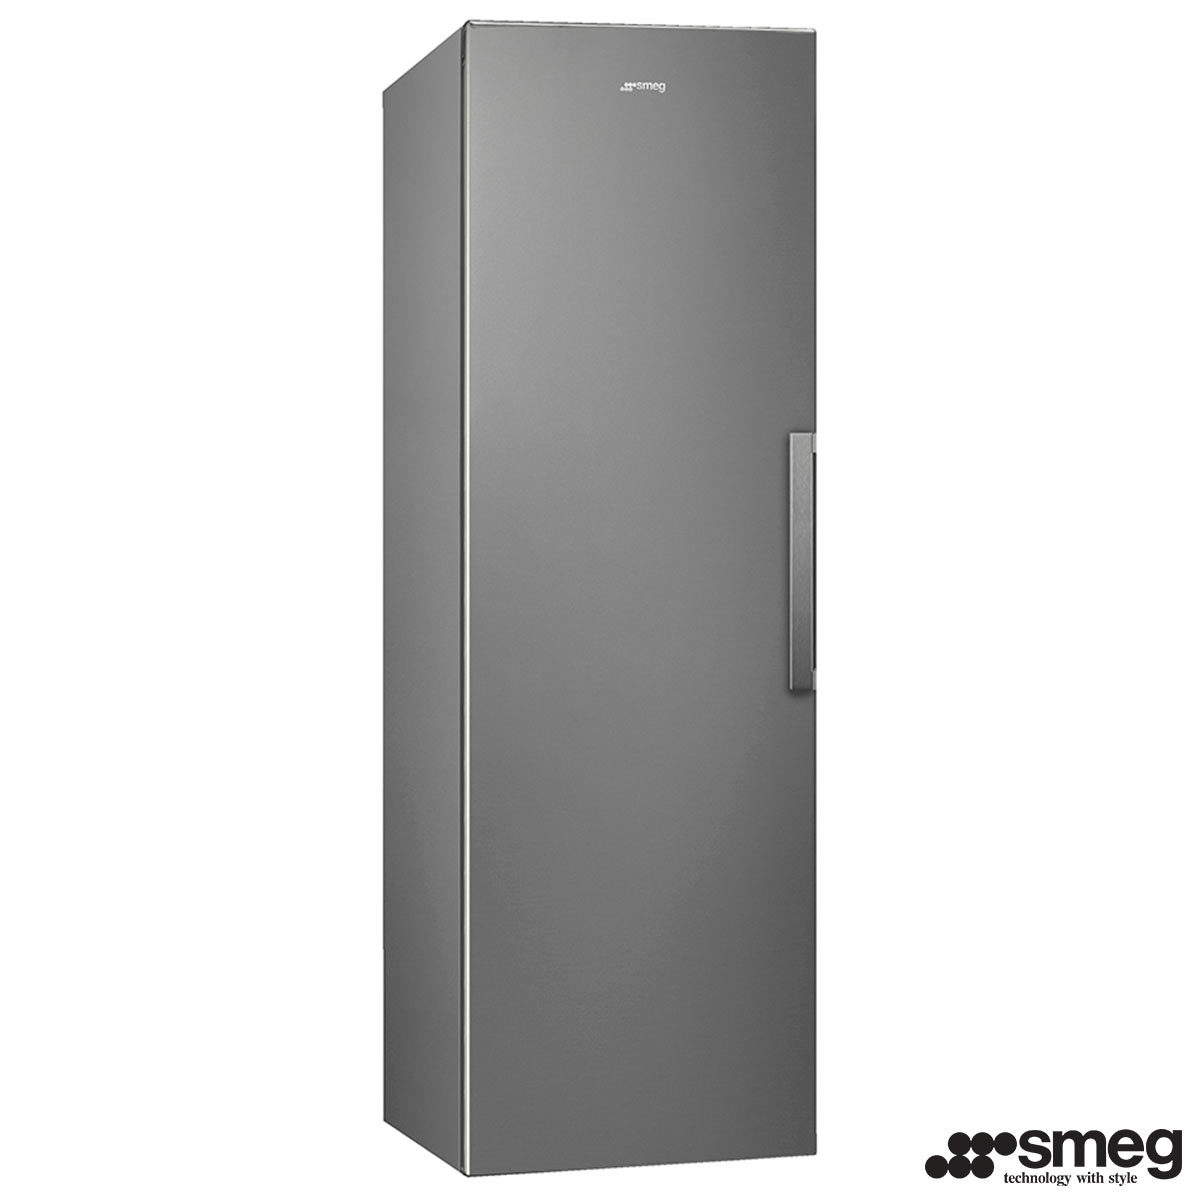 Smeg UK26PXNF4, Freezer A+ Rated in Stainless Steel